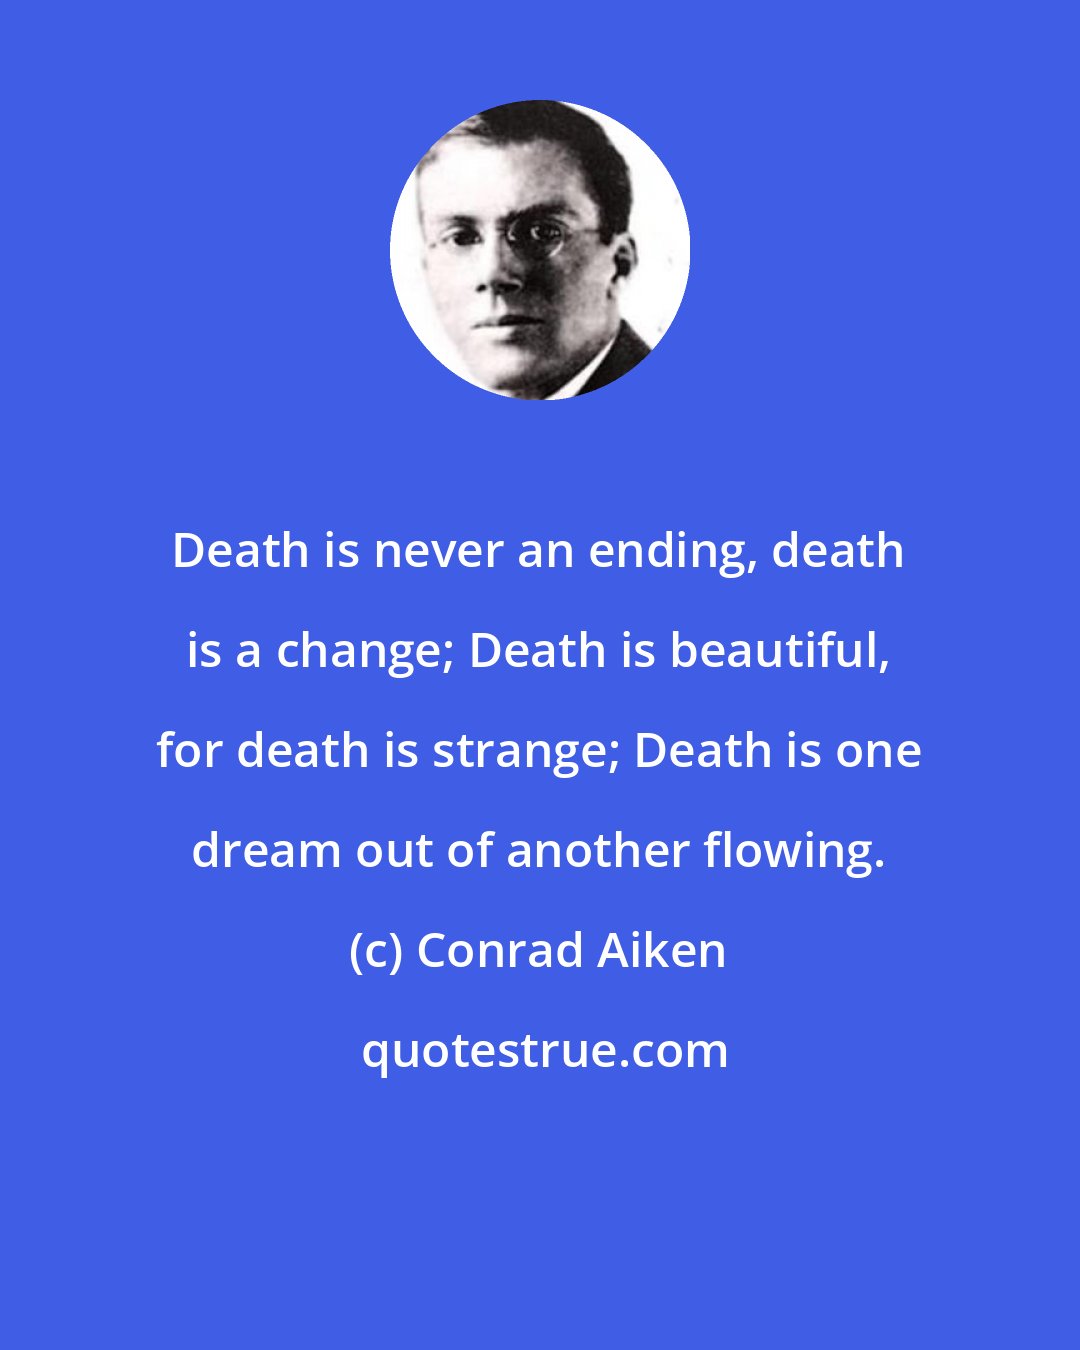 Conrad Aiken: Death is never an ending, death is a change; Death is beautiful, for death is strange; Death is one dream out of another flowing.